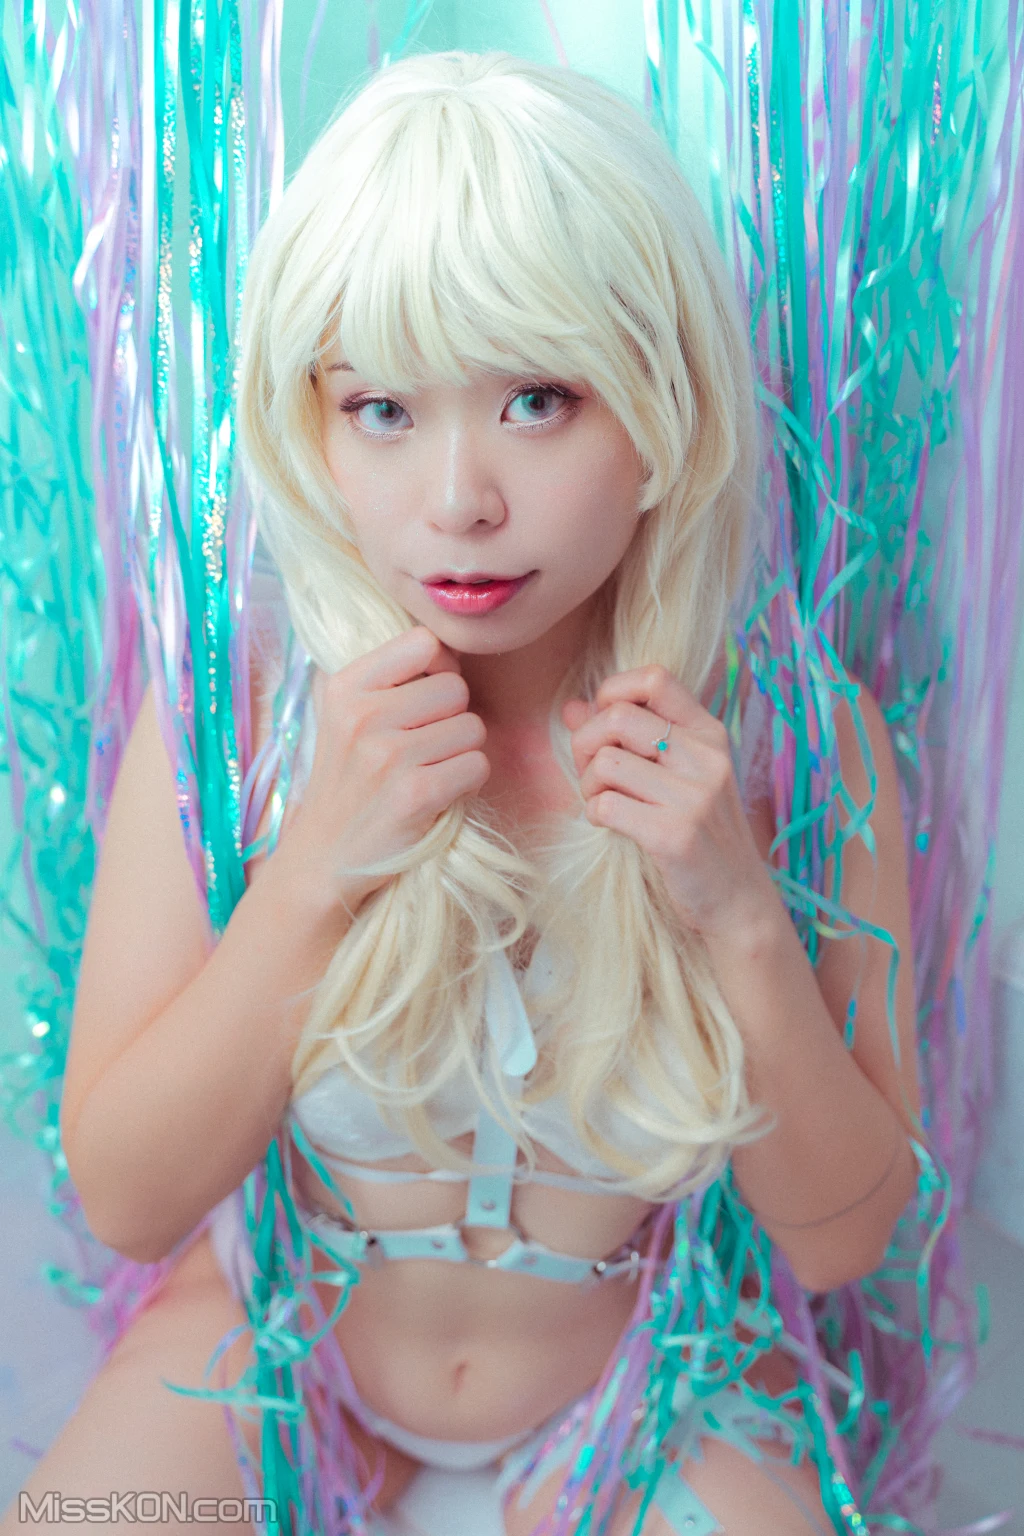 Kuromelo (黒メル): Bounded Wings Series 1 – Tricia White Feather (83 photos)